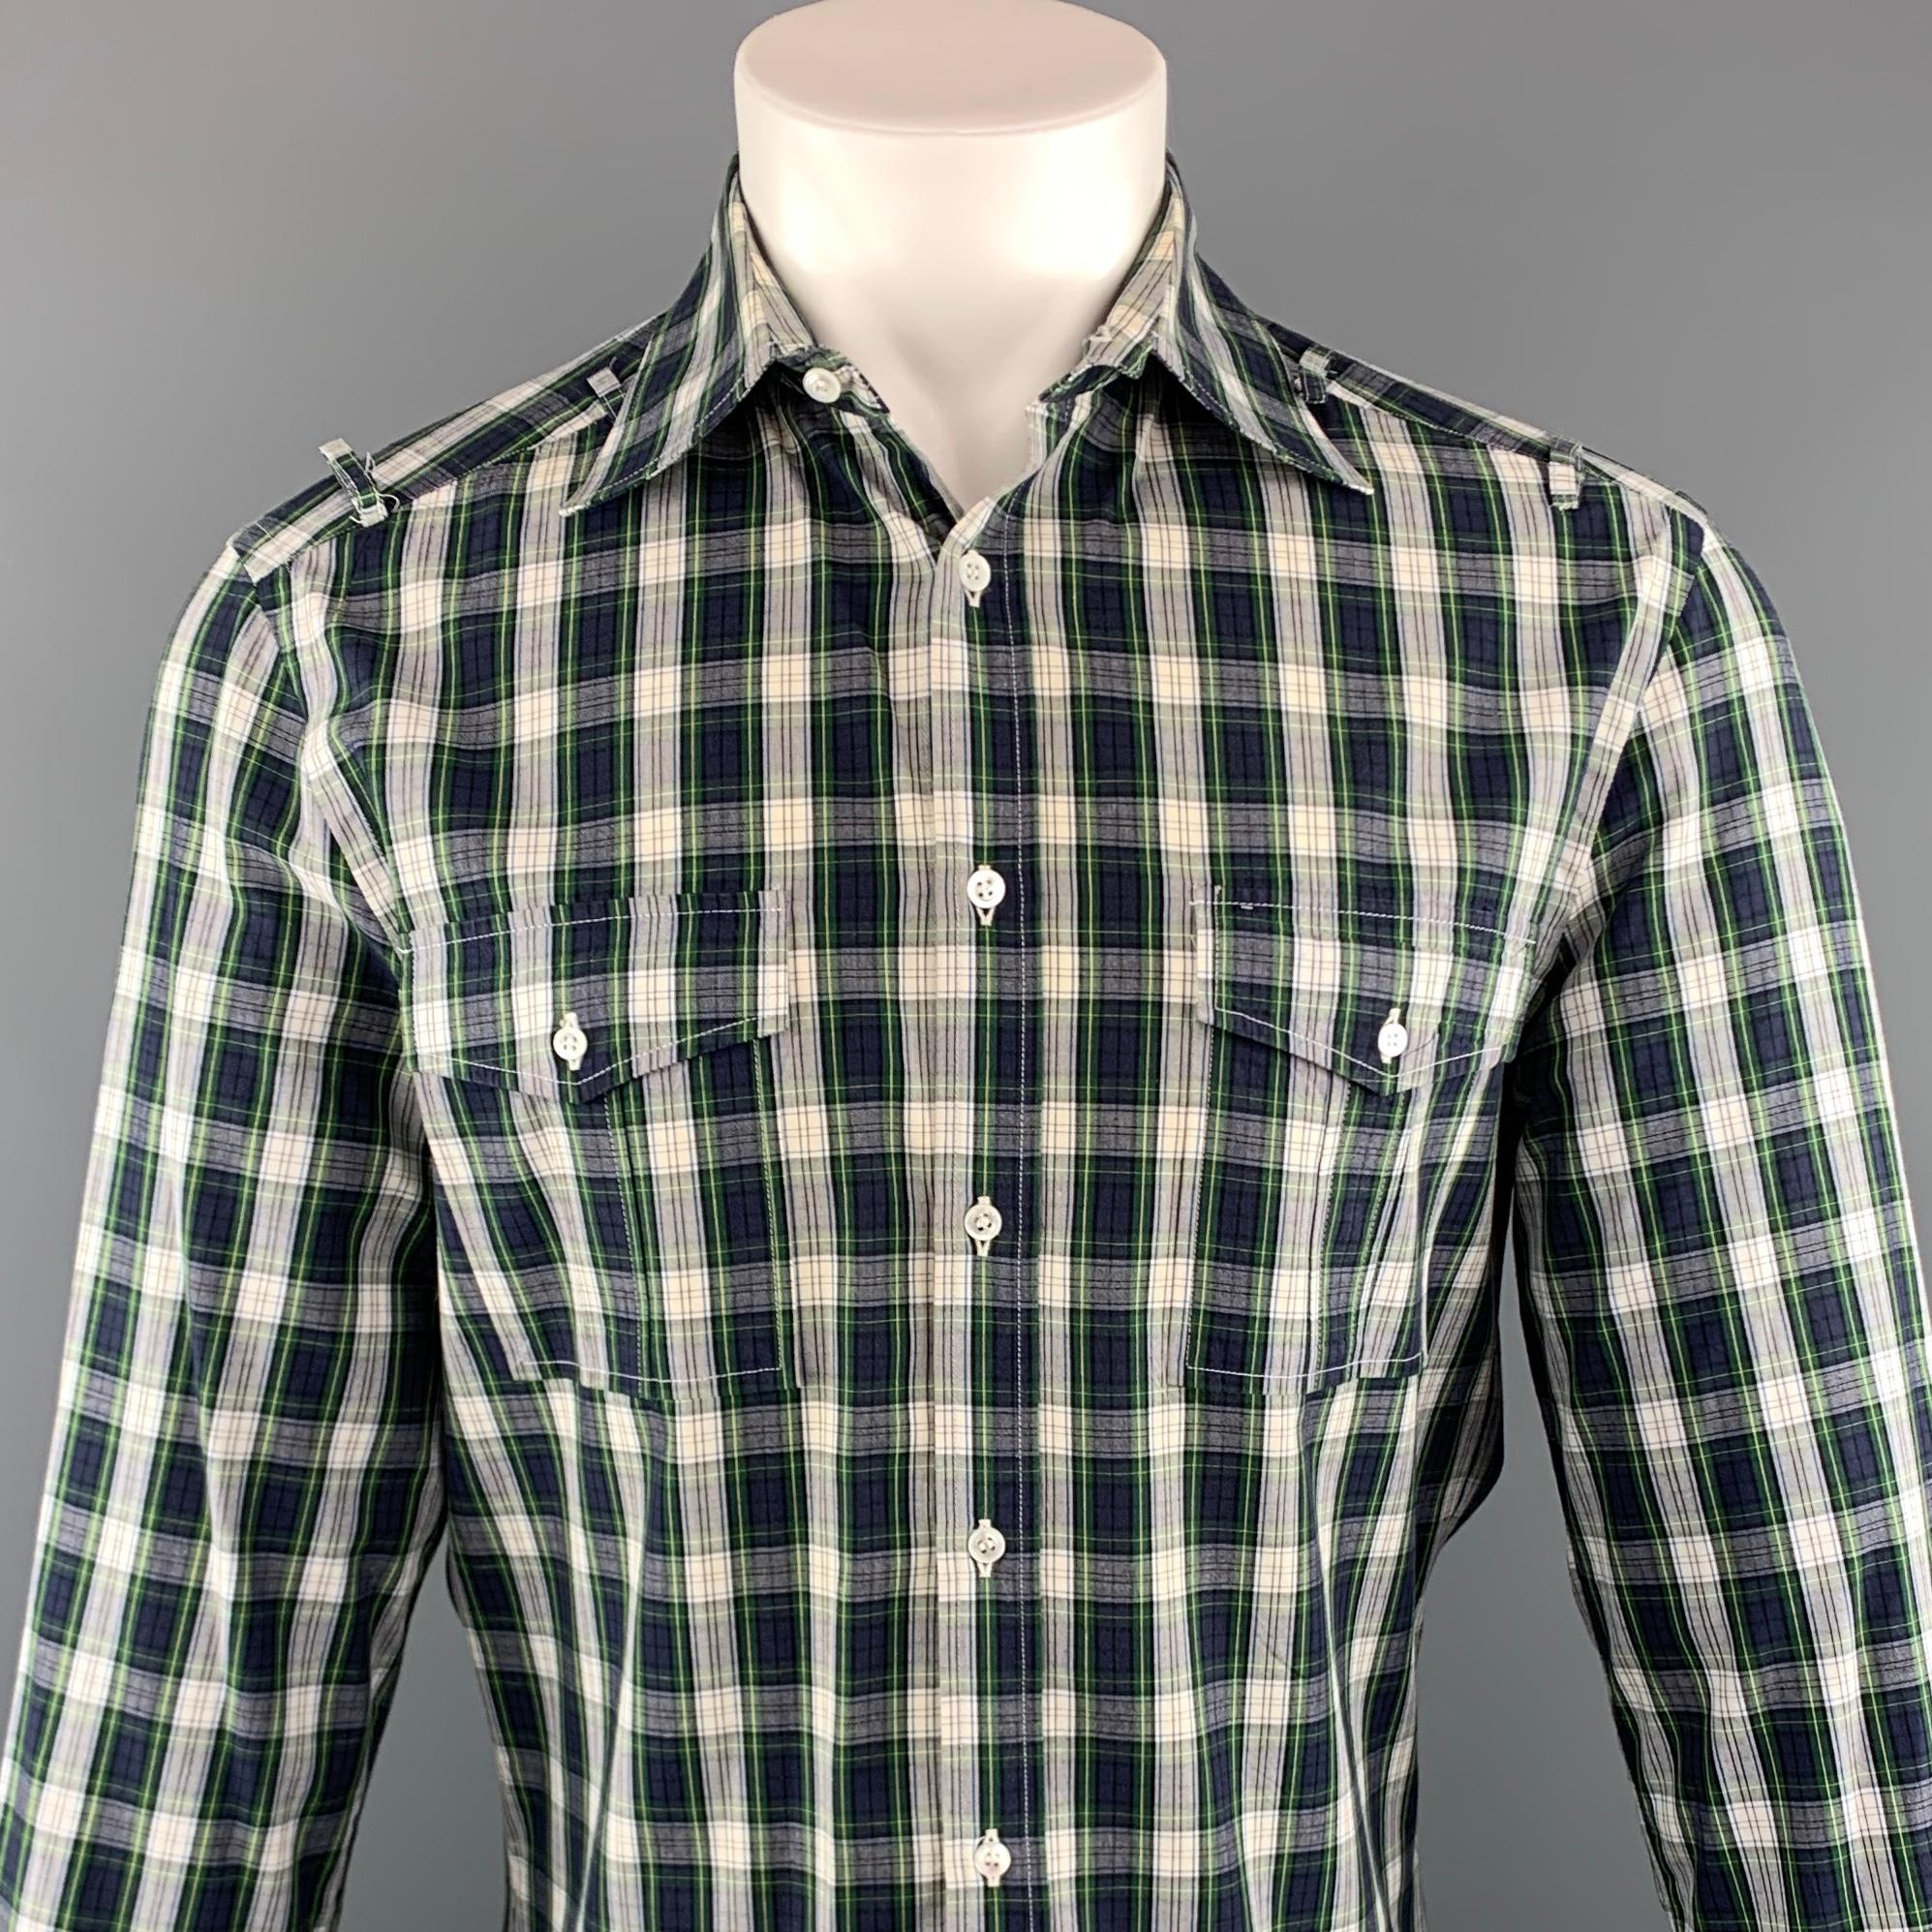 MICHAEL BASTIAN long sleeve shirt comes in a navy and white plaid cotton featuring a button up style, shoulder loop details, and front patch pockets. Made in Italy.
 
Excellent Pre-Owned Condition.
Marked: 40
 
Measurements:
 
Shoulder: 17.5